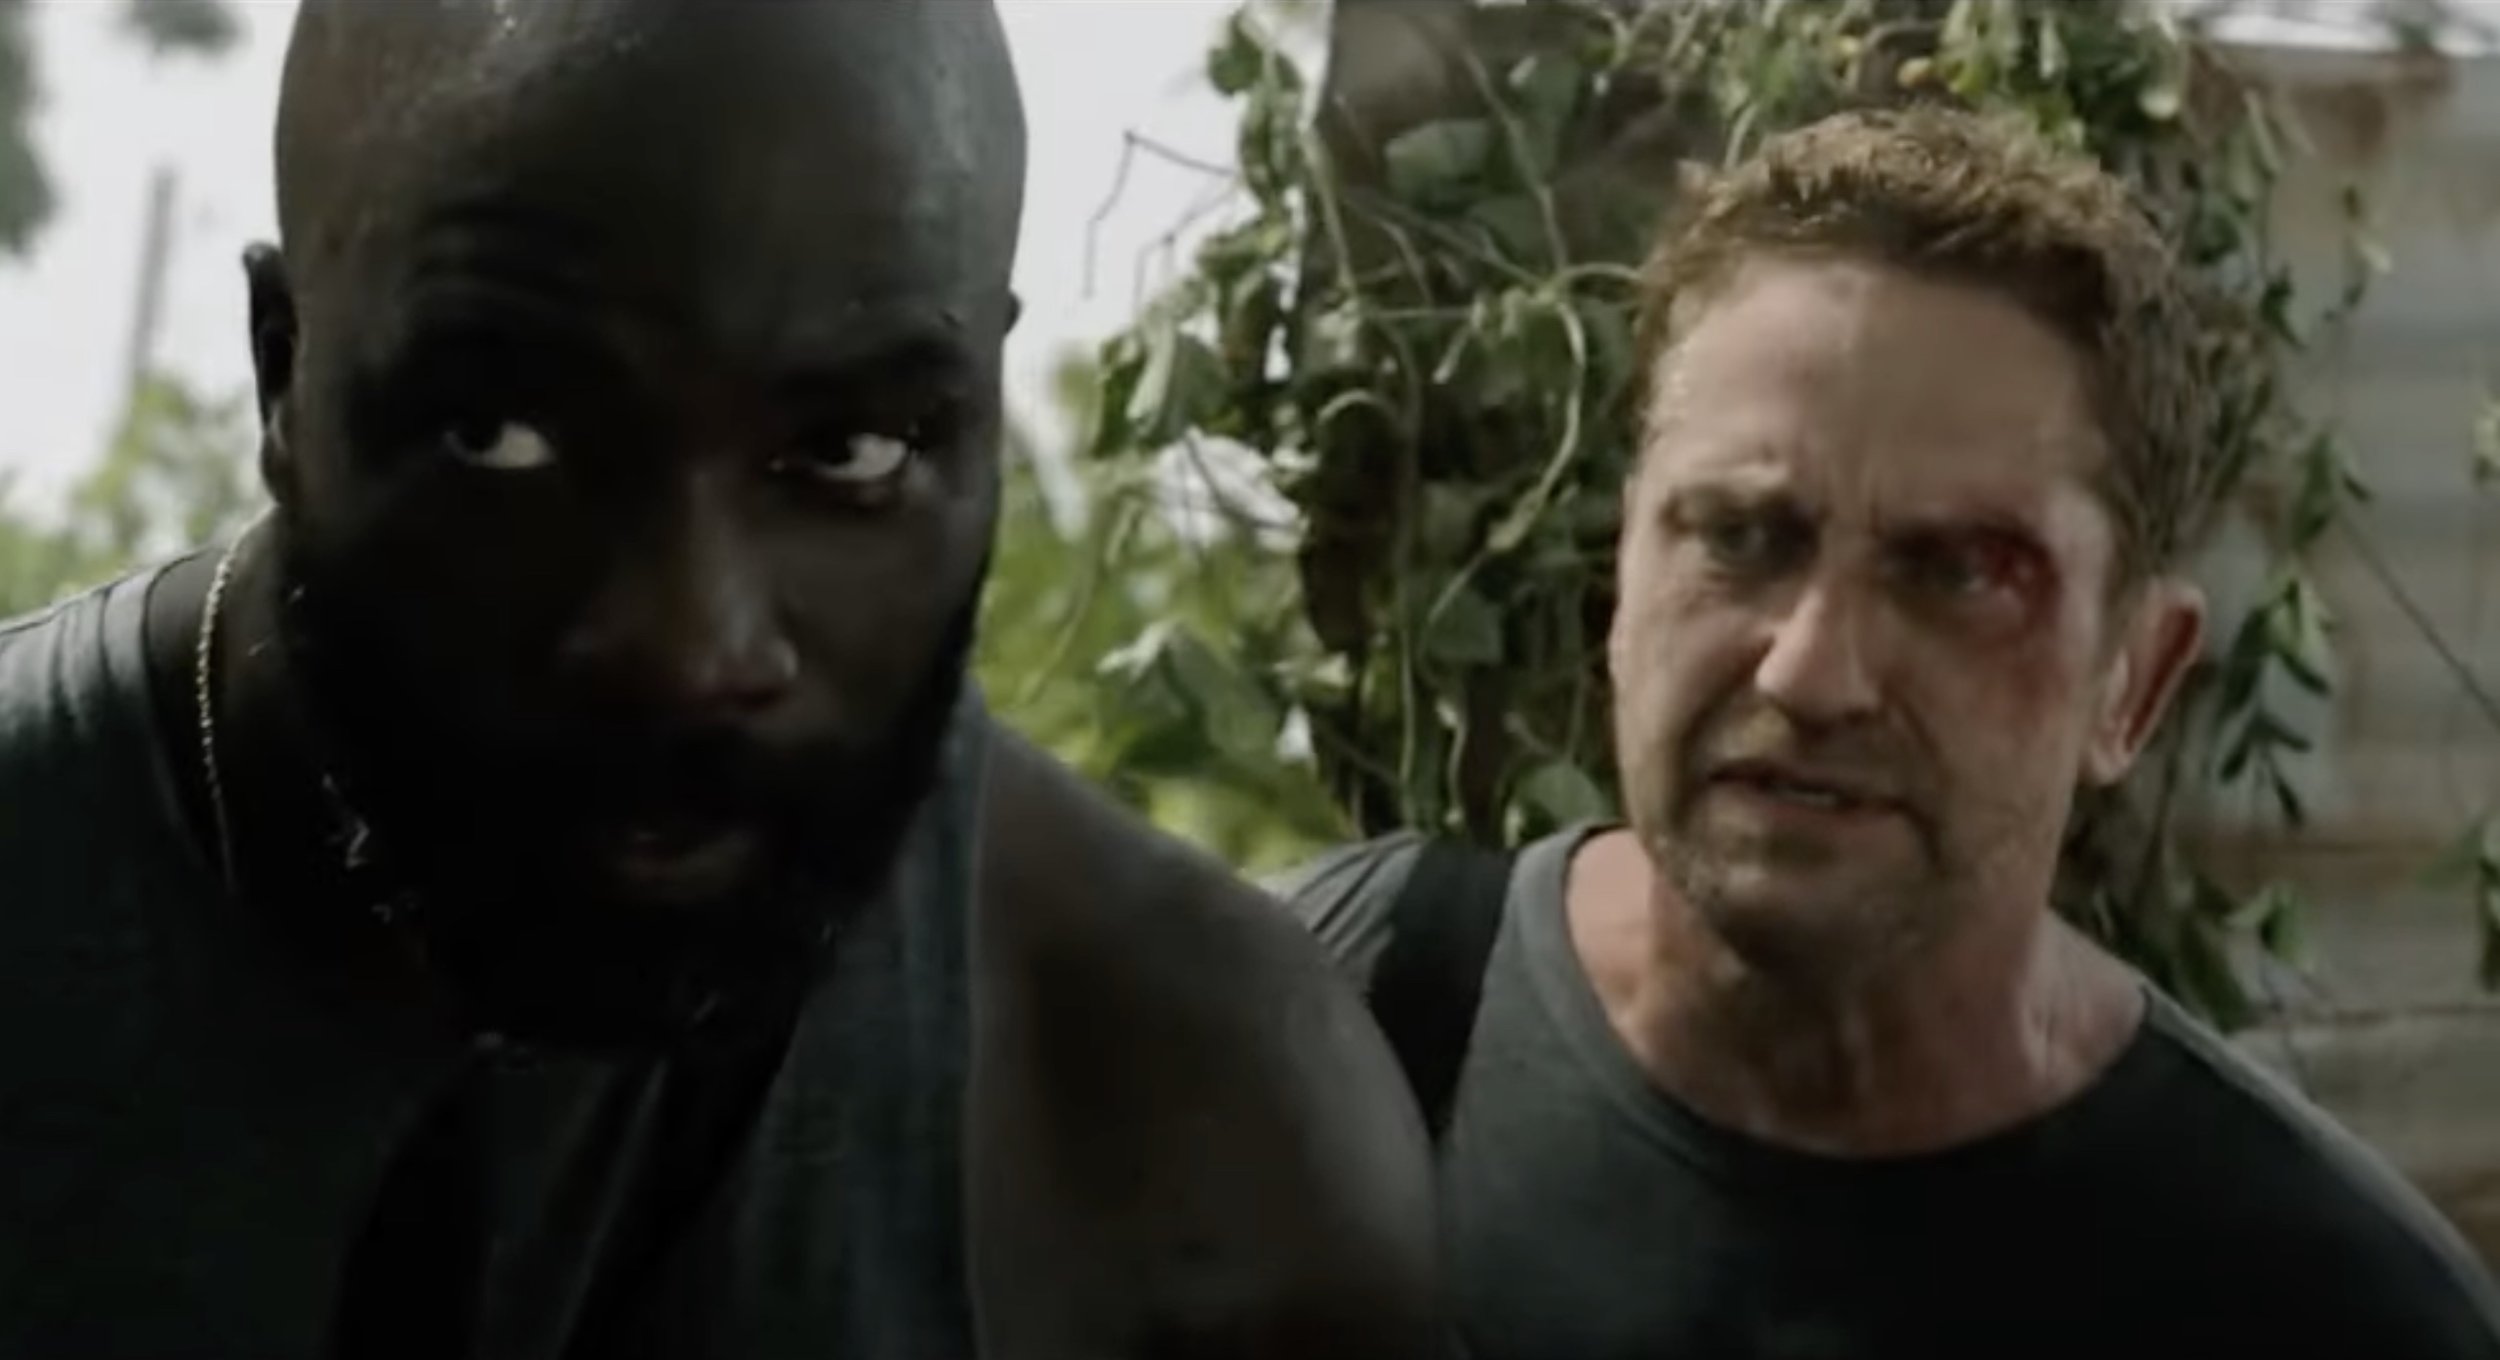 UPDATE) PLANE: Gerard Butler & Mike Colter Must Survive More than